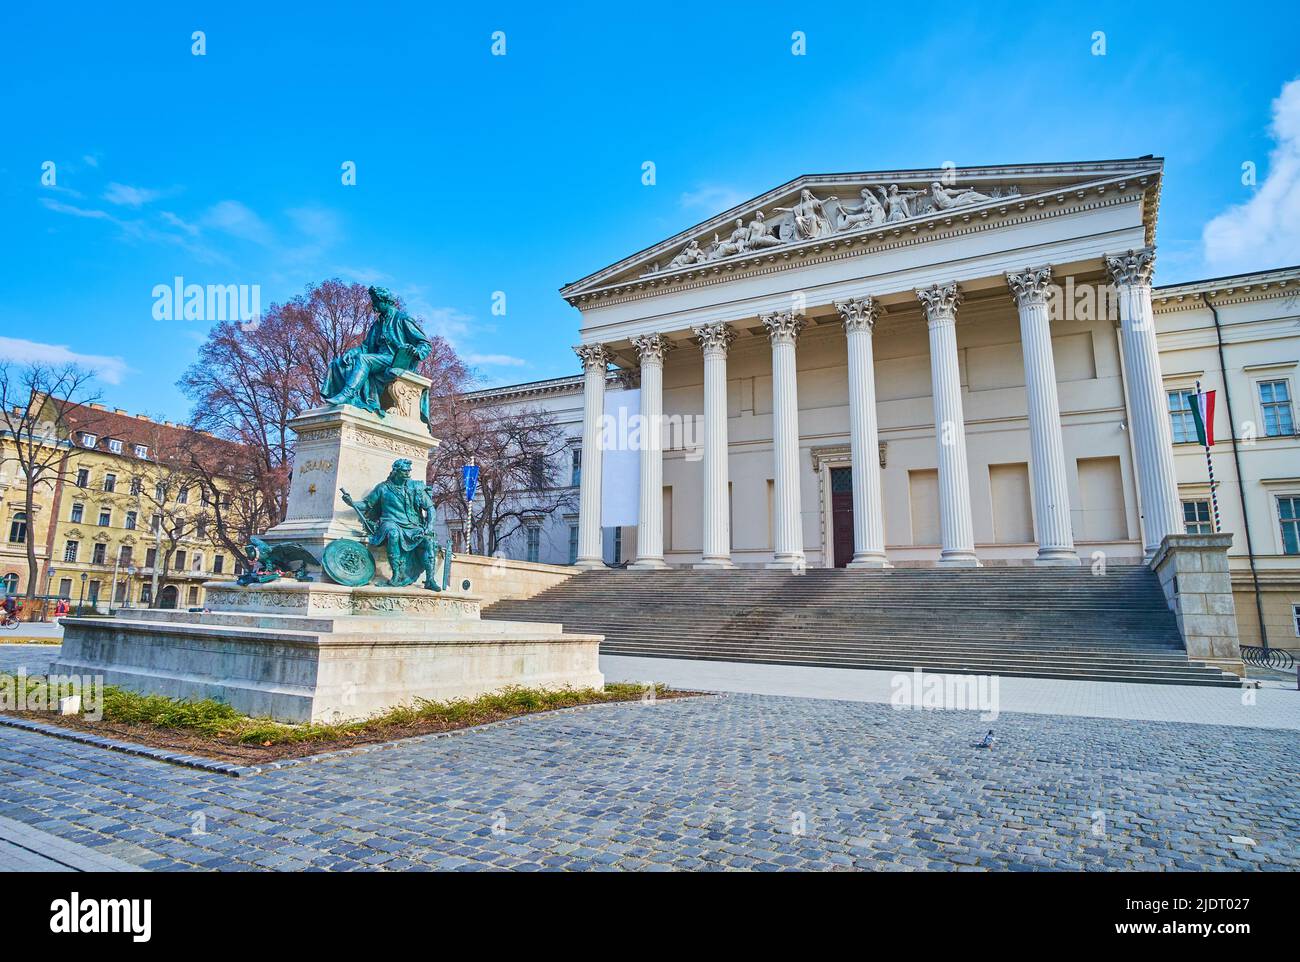 Architecural ensemble of Hungarian National Museum with statue of Janos Arany in the foreground, Budapest, Hungary Stock Photo